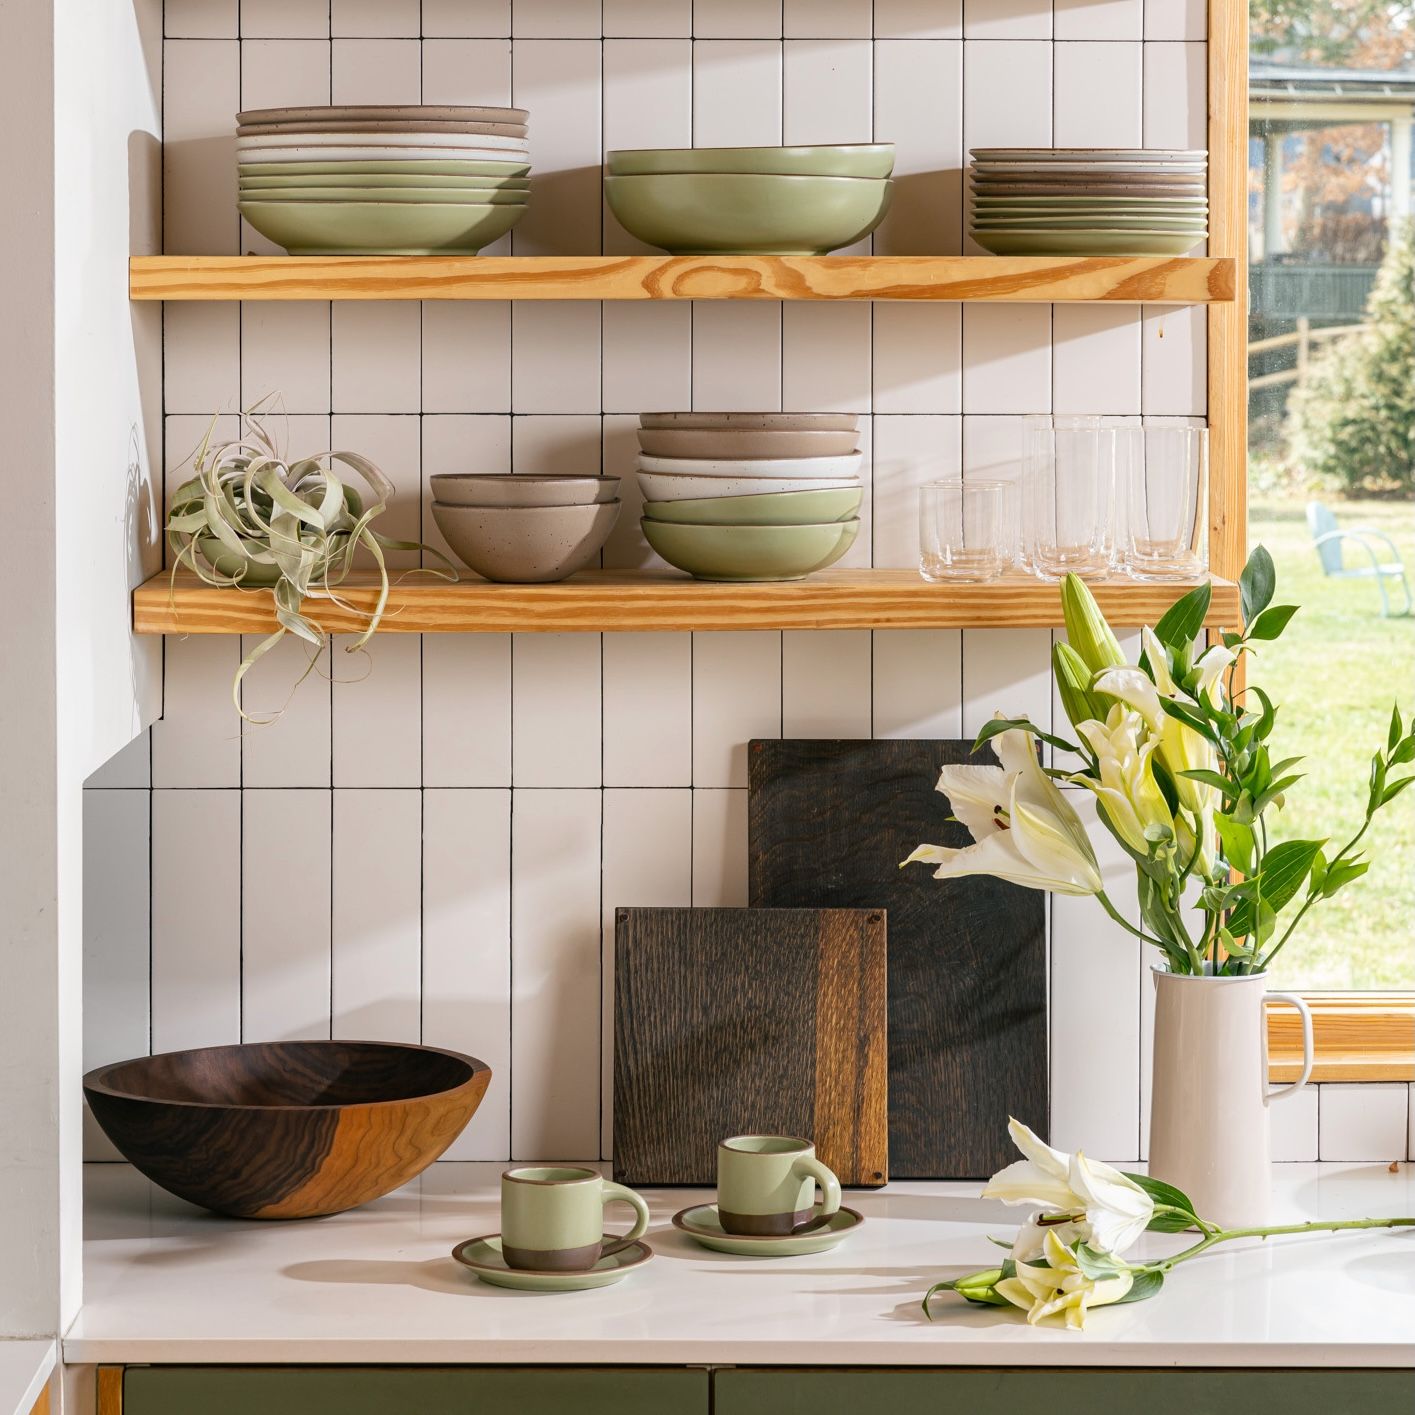 In a kitchen setting, there are floating shelves above a countertop filled with stacks of bowls and plates, simple drinking glasses, and an air plant. On the countertop is small mugs sitting on saucers, a large walnut bowl, 2 large dark cutting boards, and a water pitcher filled with flowers.